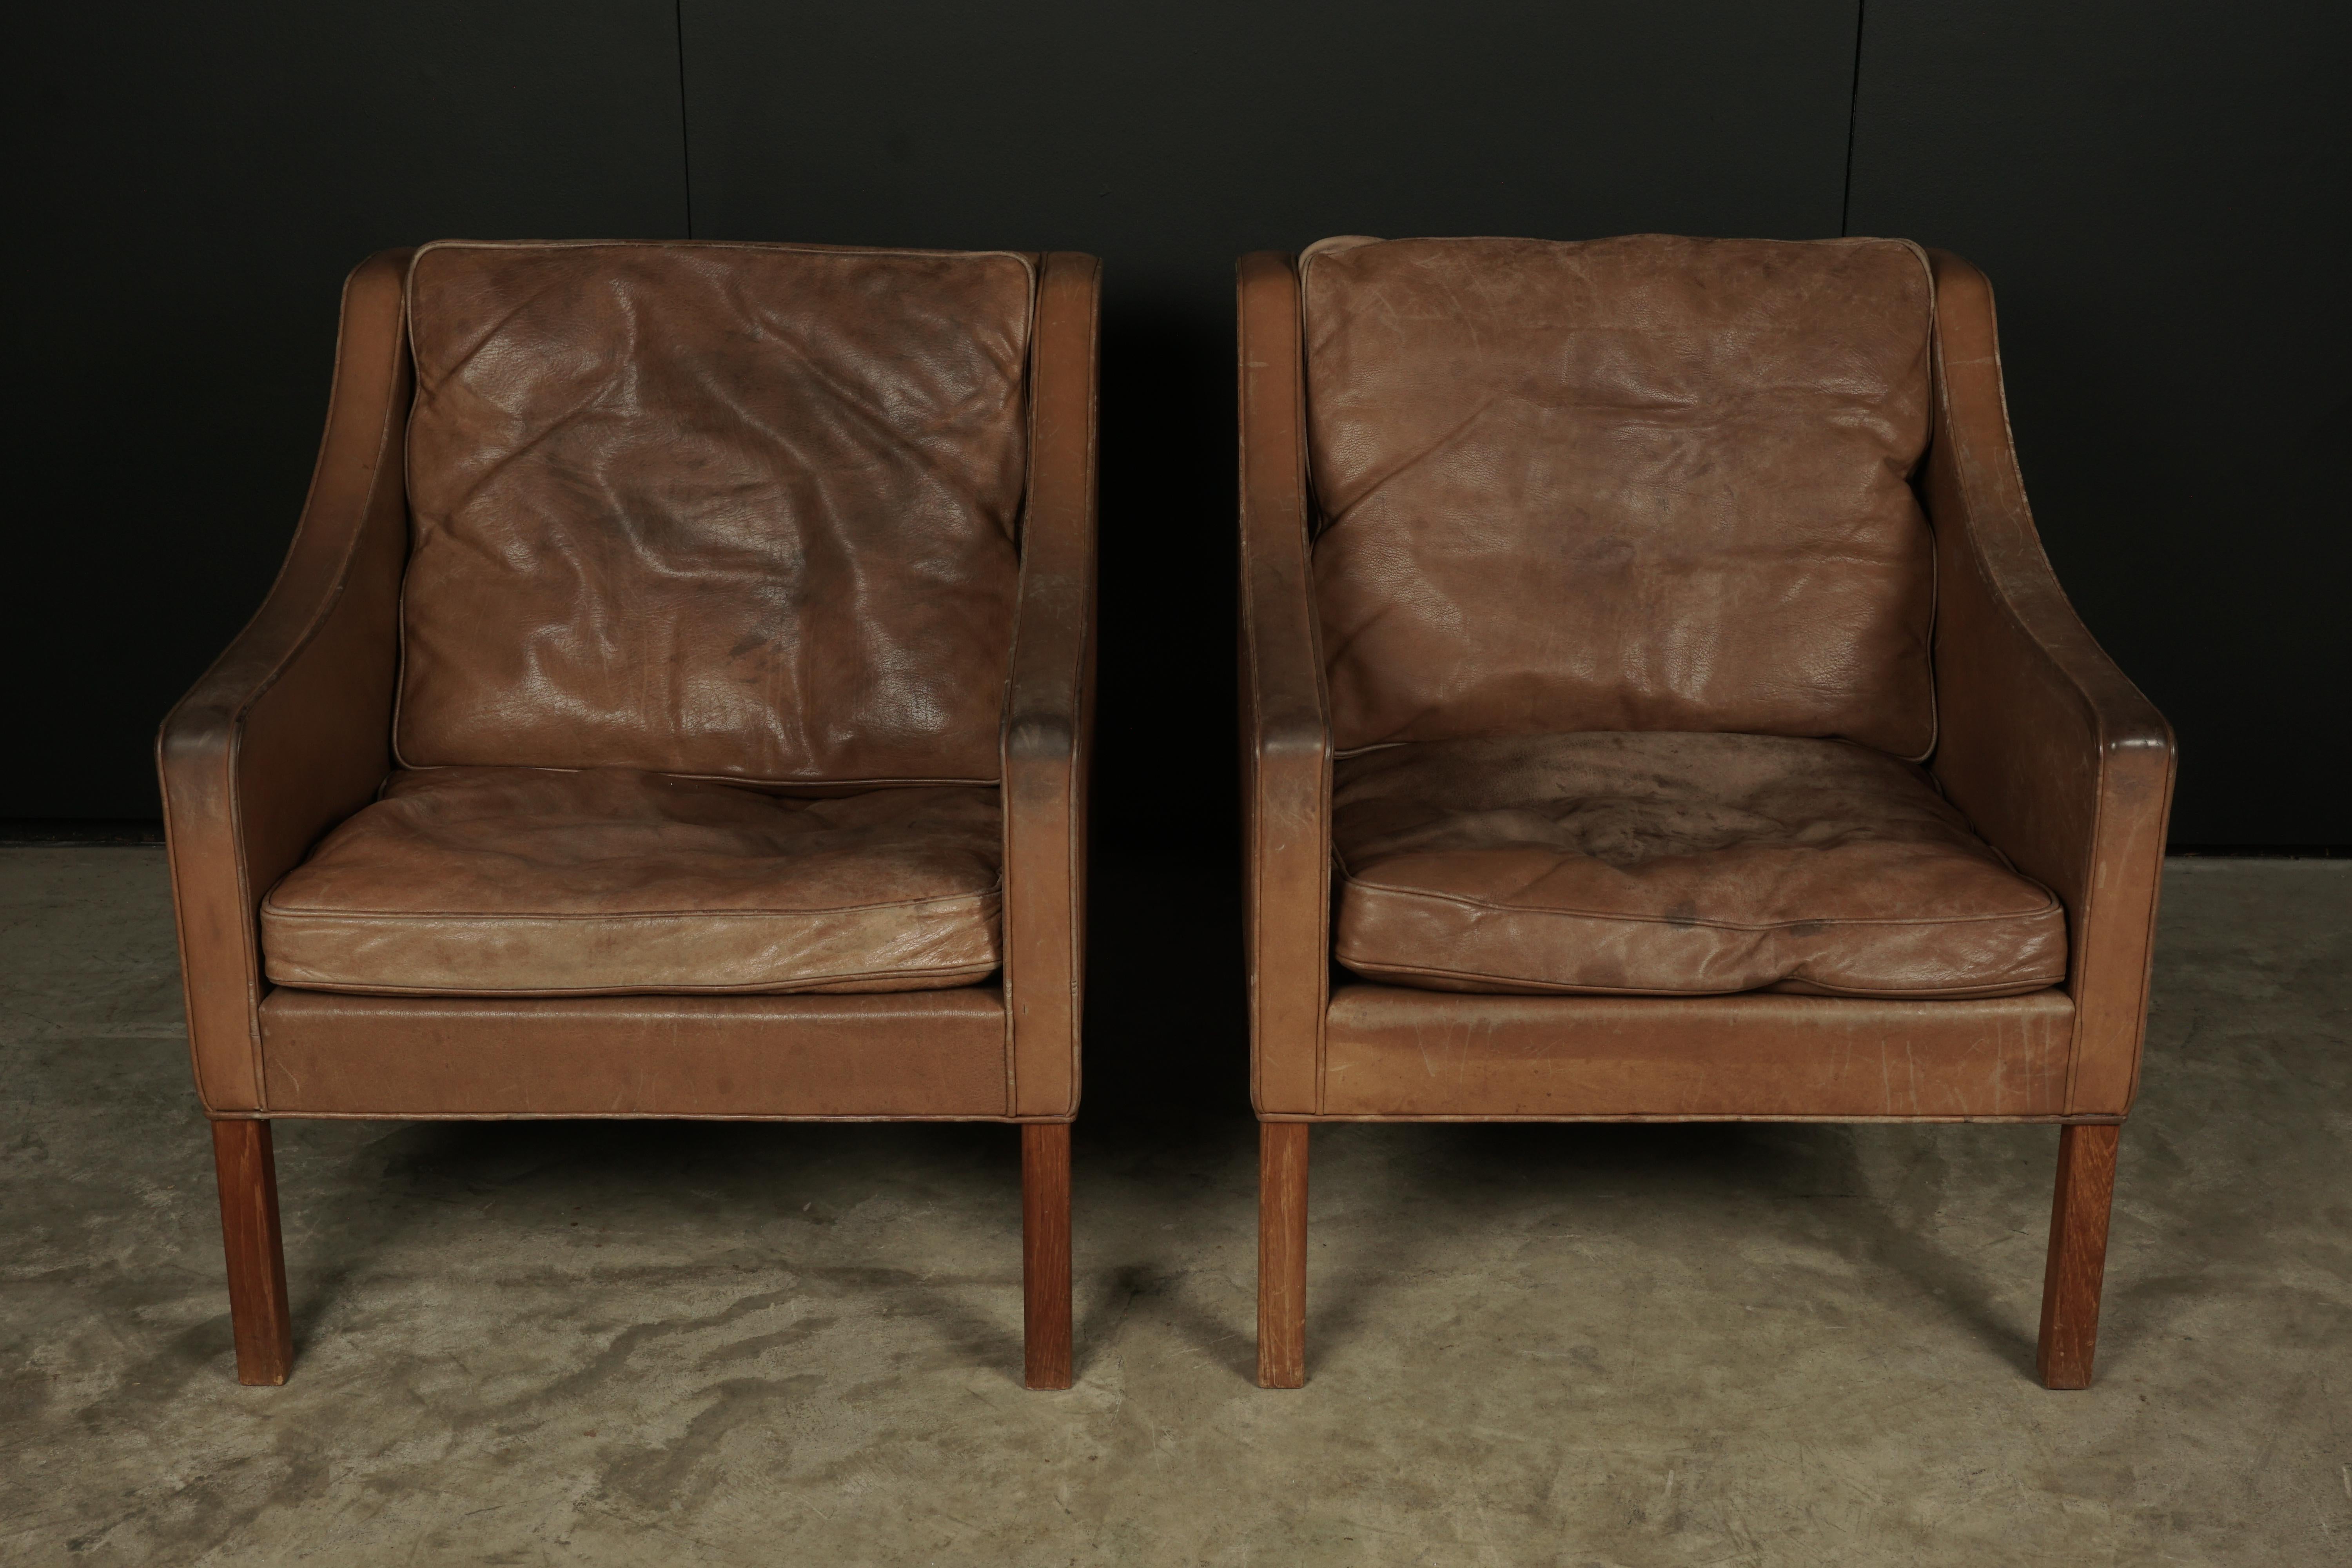 Pair of Borge Mogensen lounge chairs from Denmark, circa 1970. Original brown leather with nice wear and patina.